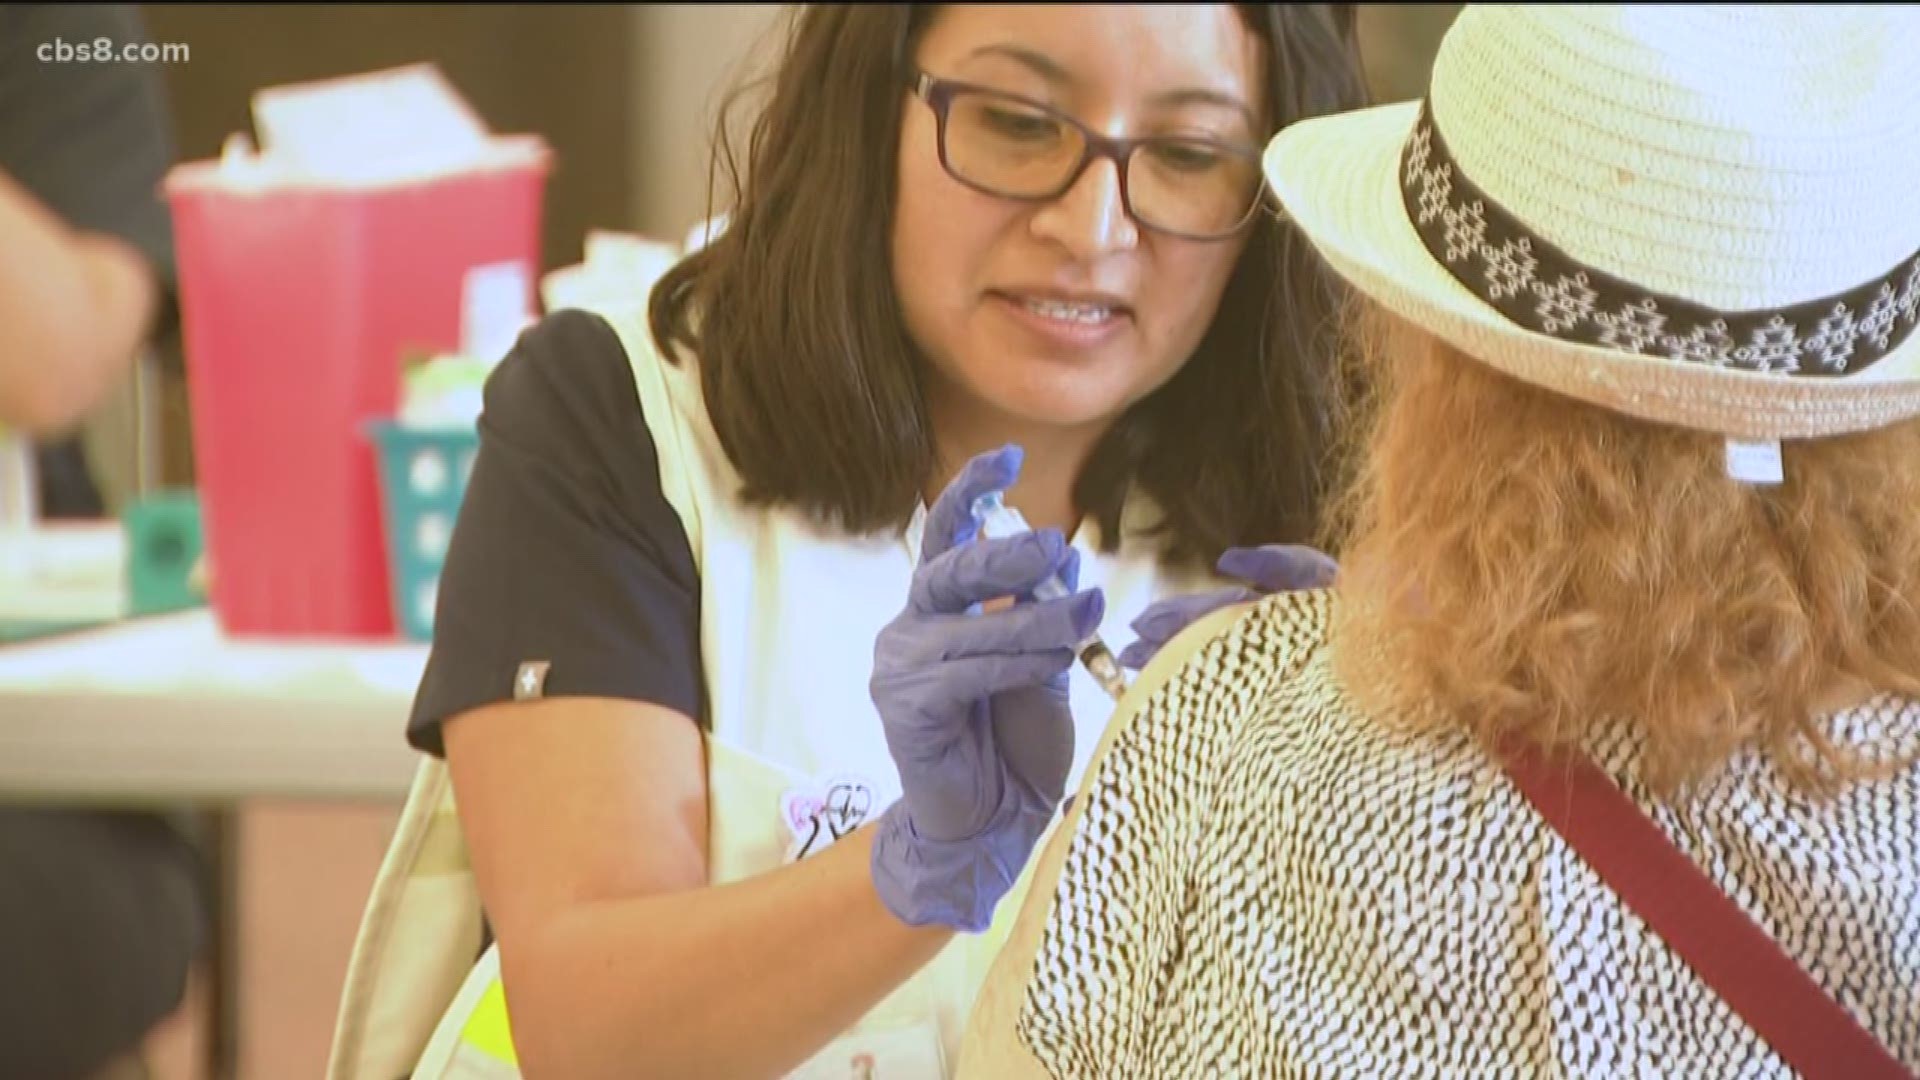 an Diego County officials on Tuesday teamed up with National City for a free vaccination clinic as it reminds residents to get their flu shot.